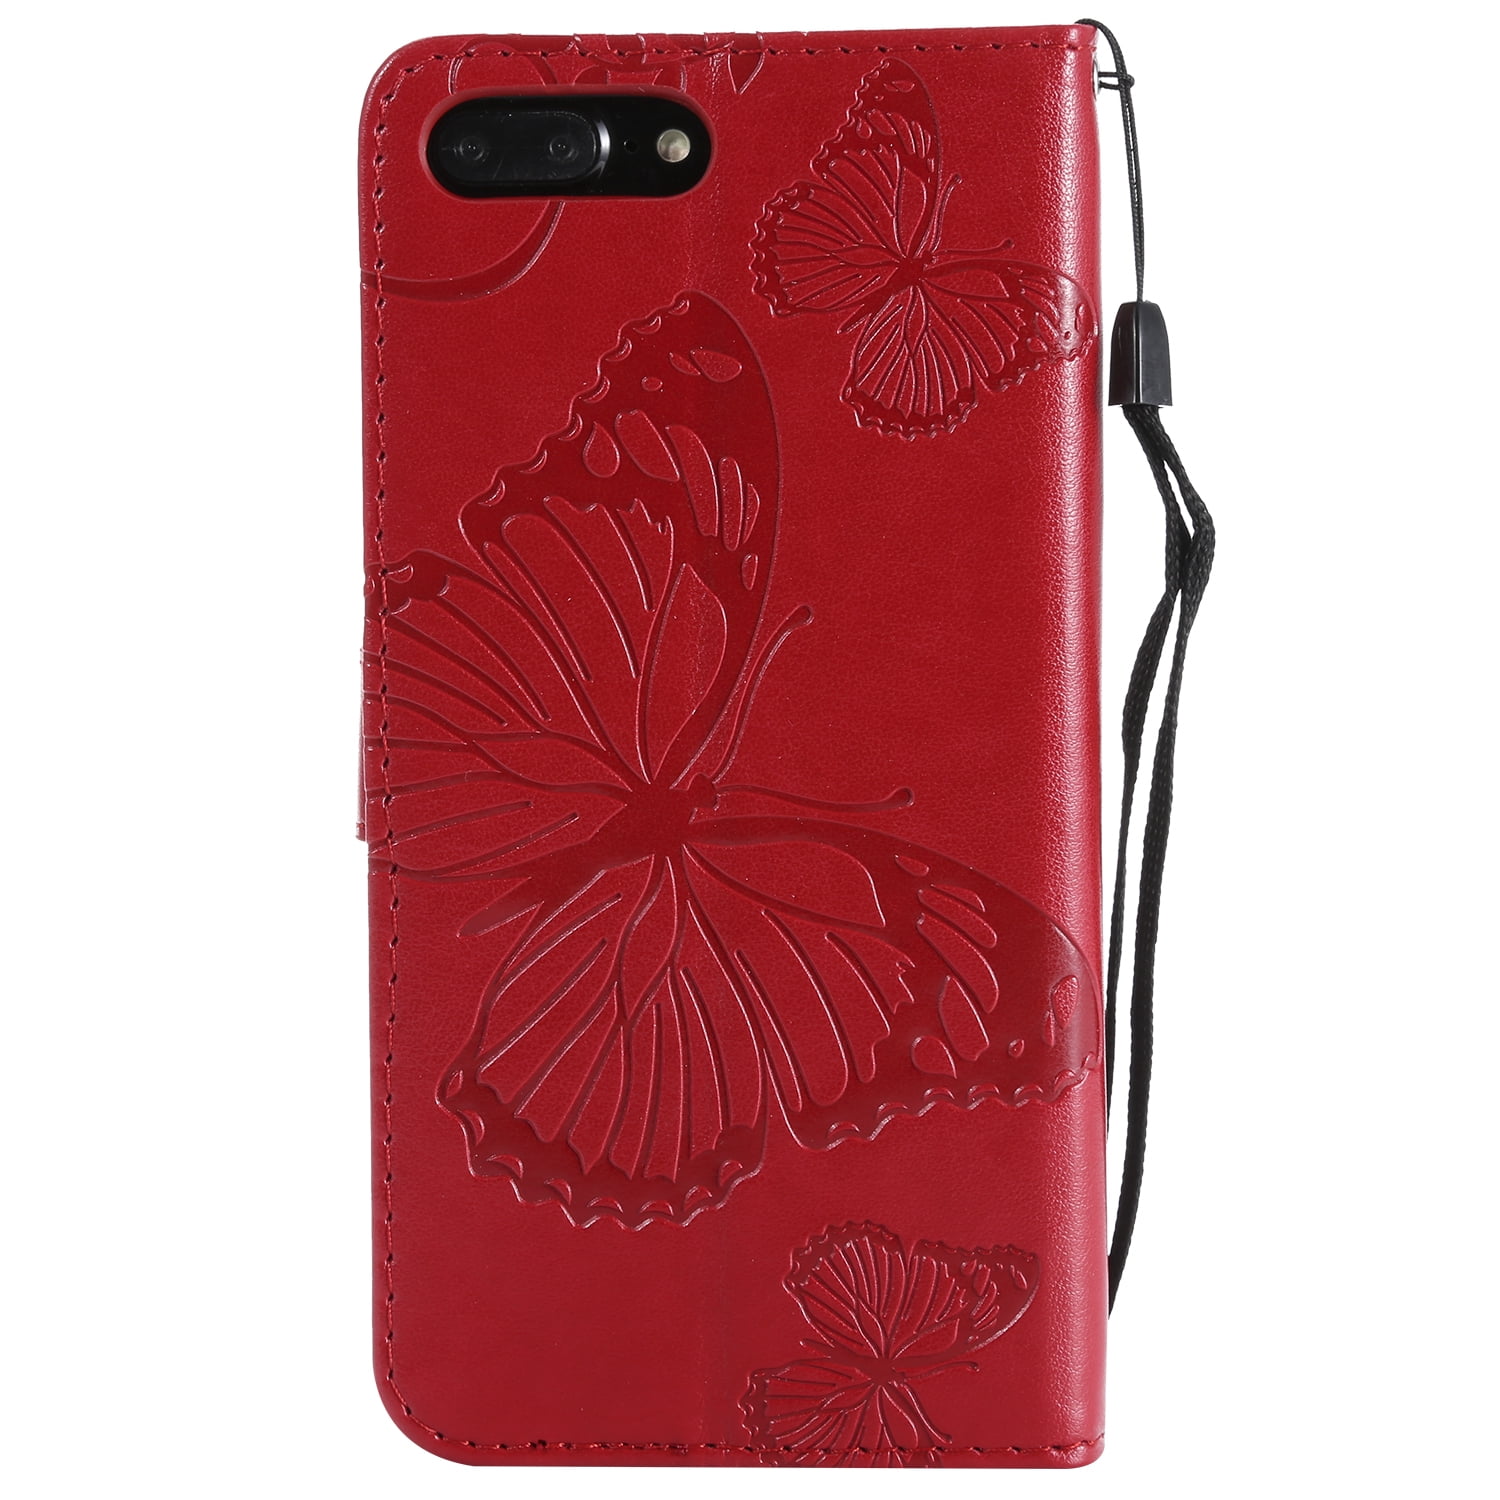 Leather Louis Vuitton iPhone X/8/7/6S/Plus Case Galaxy S8/Note8 Cover Red